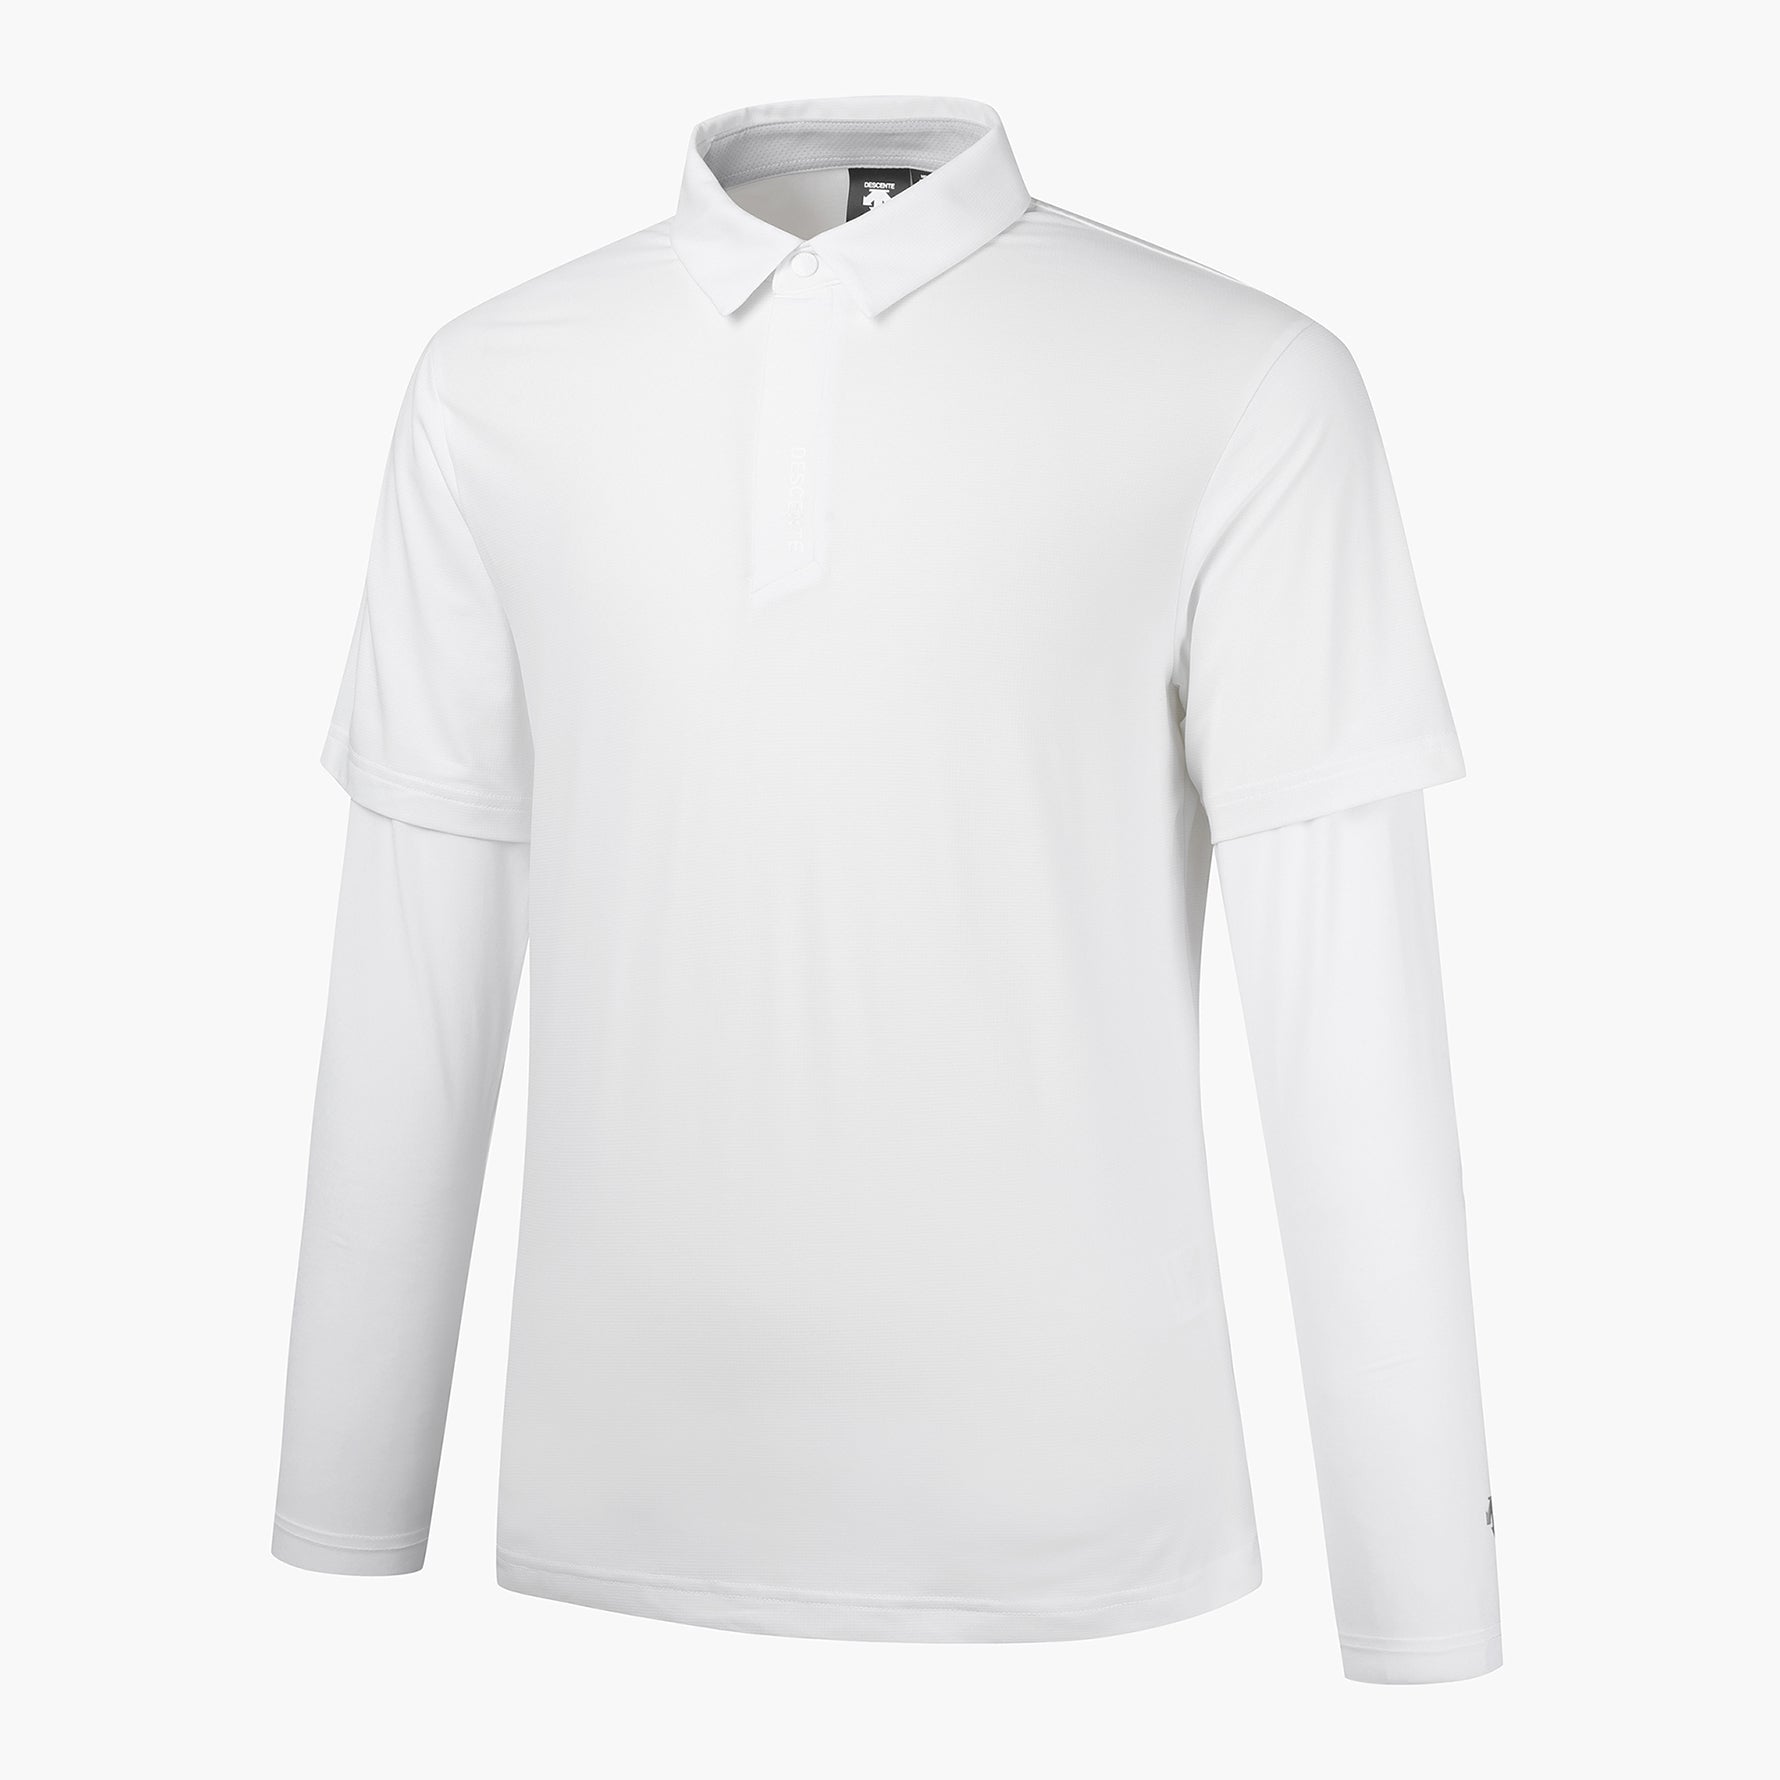 DESCENTE 23SS MEN S-PRO COOL SLEEVE LAYERED SHIRT OFF-WHITE 95 S